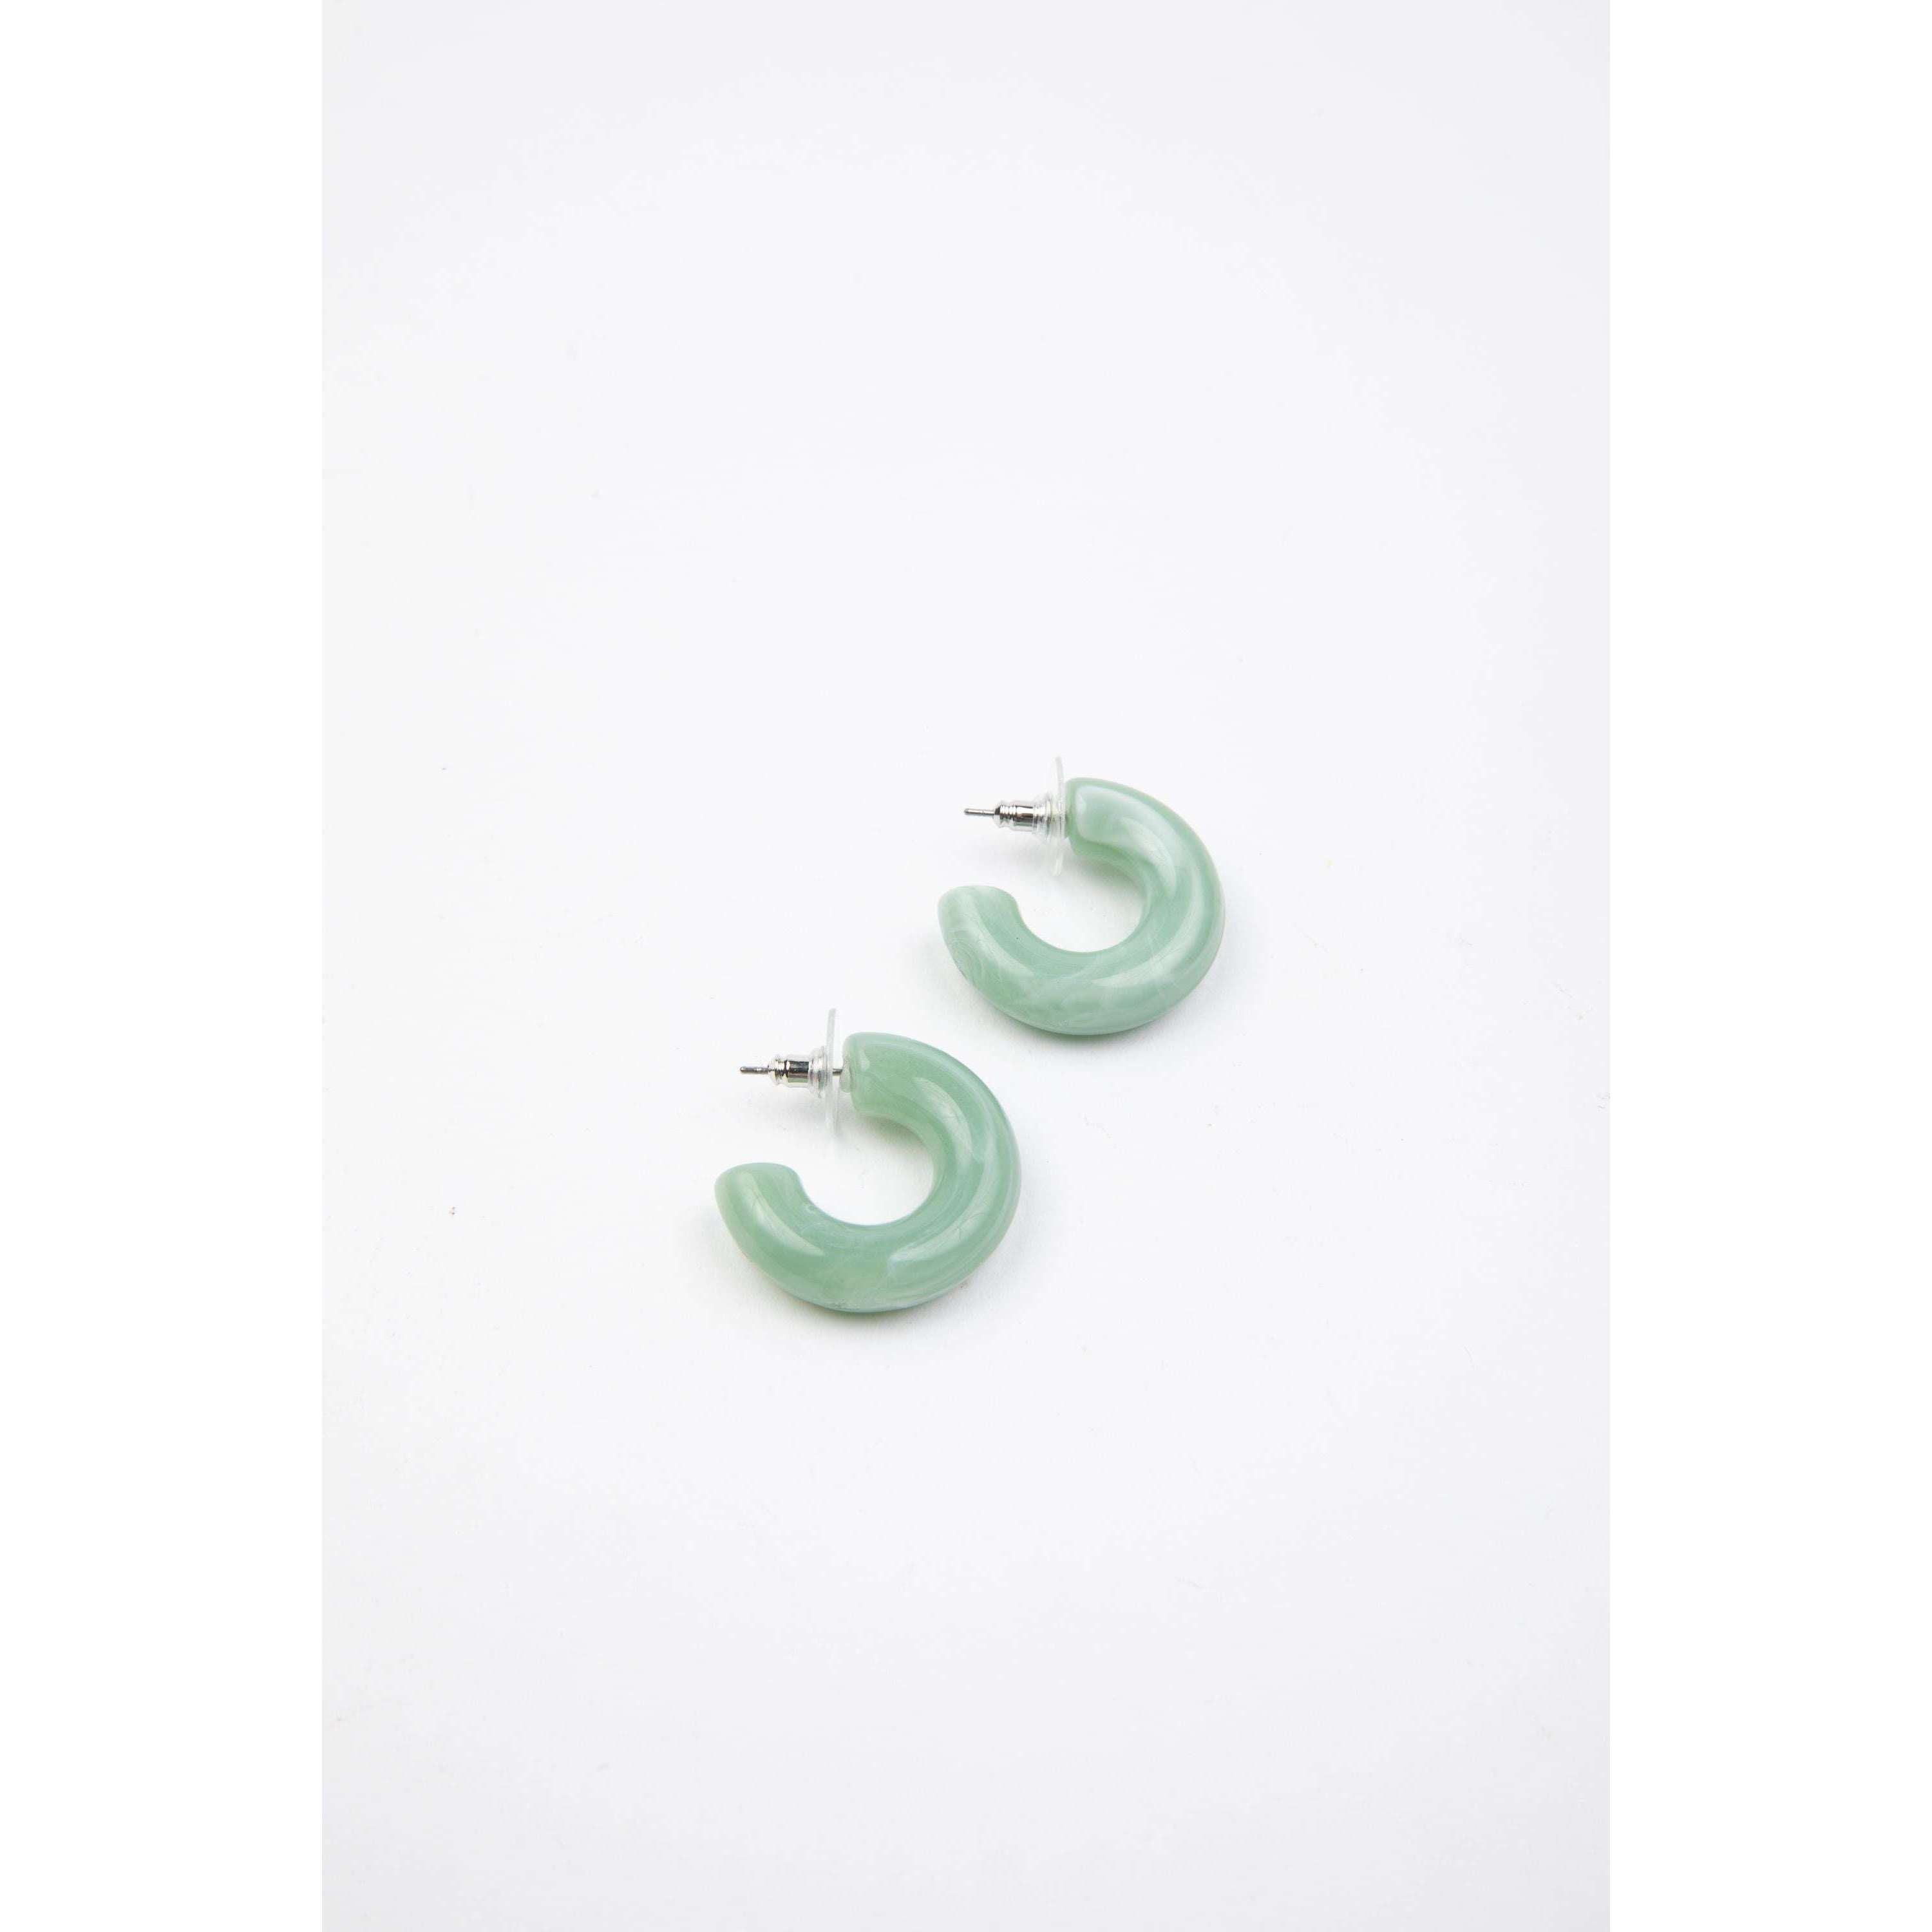 Impodimo Living & Giving:Constance Earrings:Holiday Trading & Co:Sage